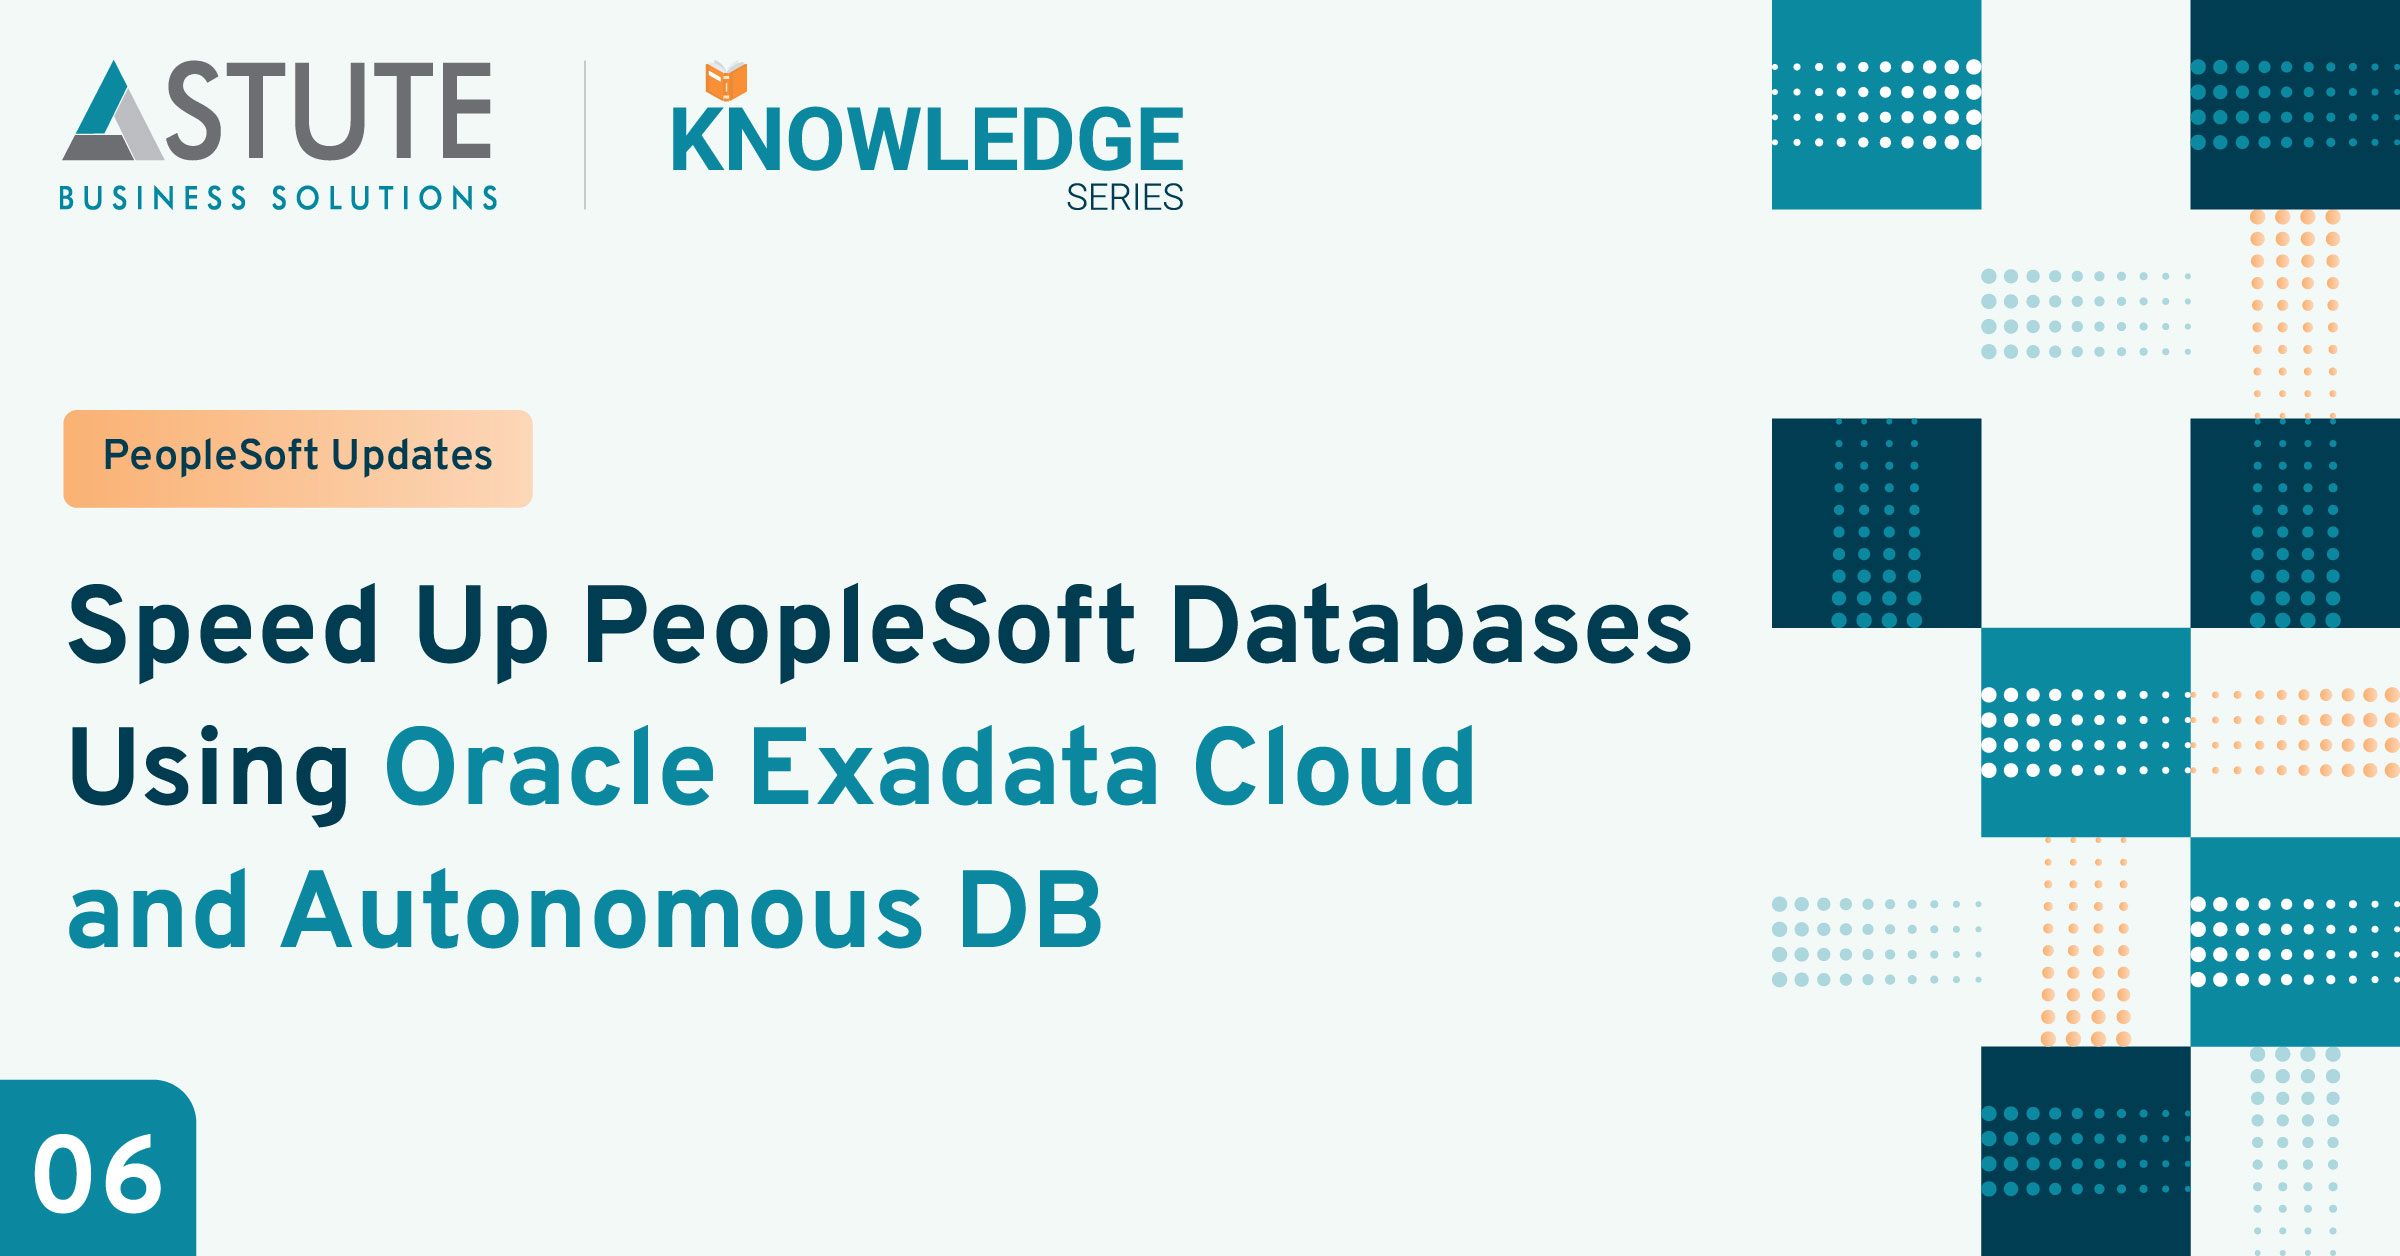 6_Speed-Up-PeopleSoft-Databases-Using-Oracle-Exadata-Cloud-and-Autonomous-DB